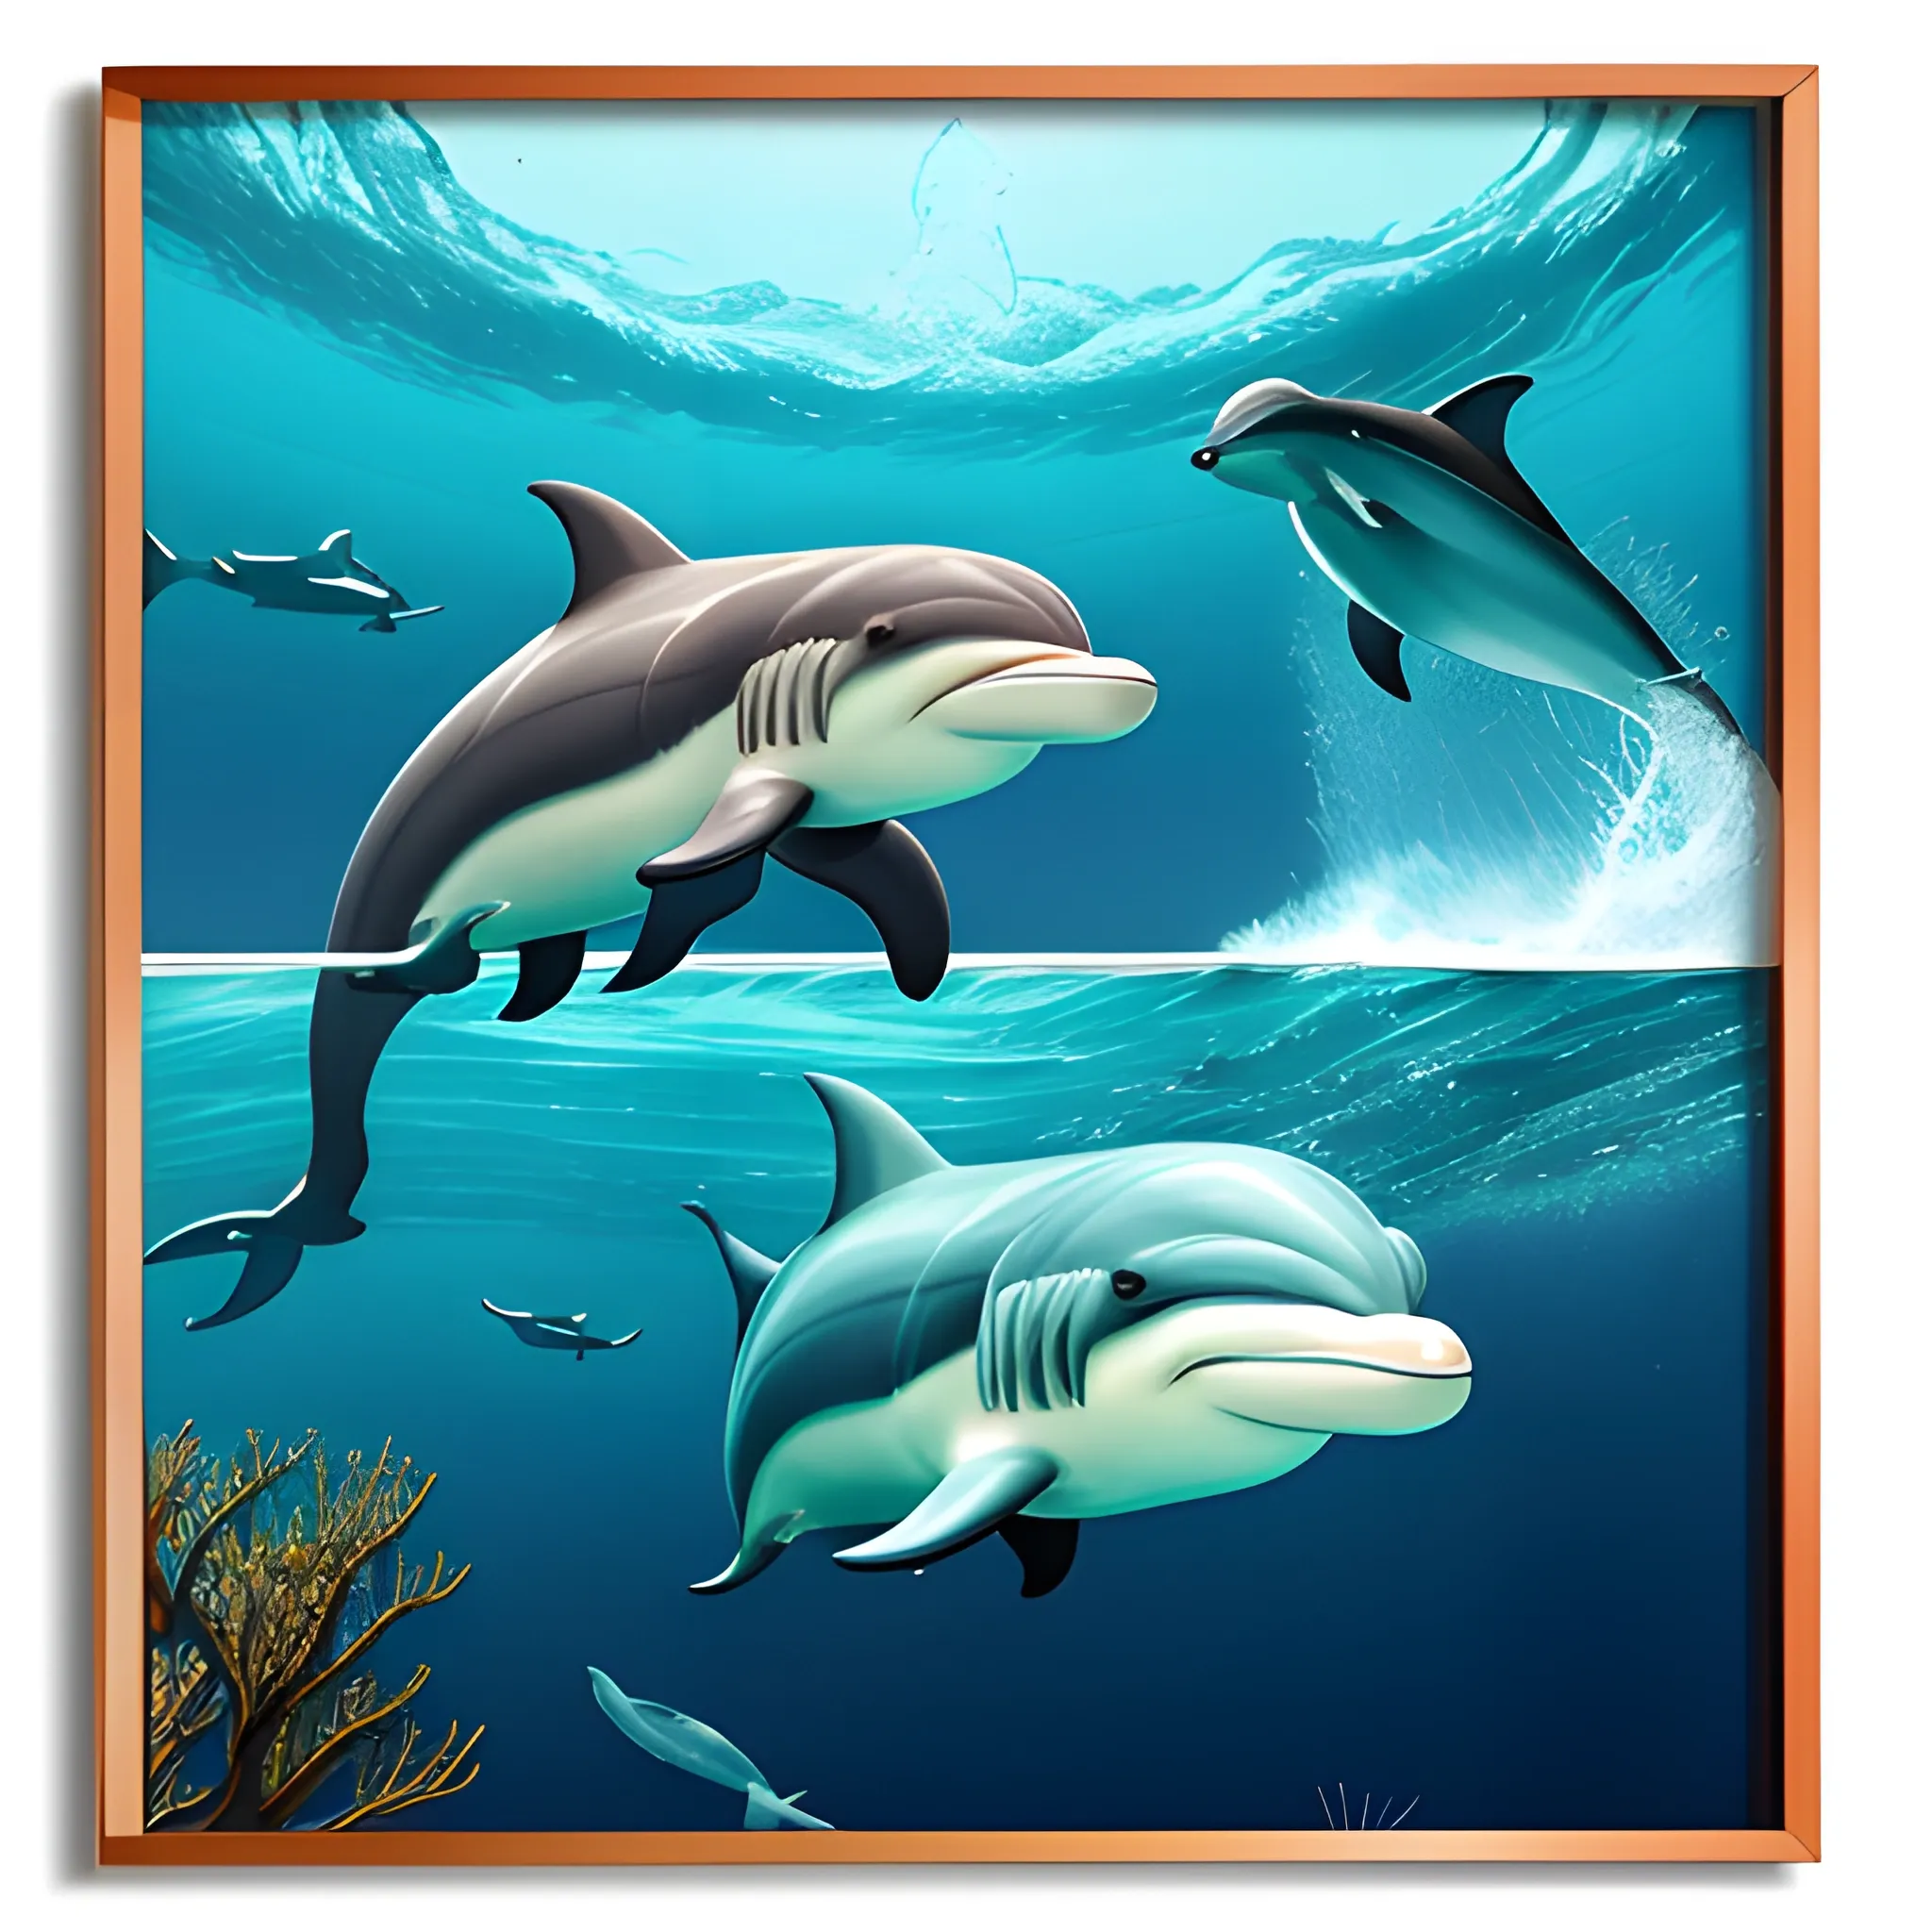 Through the lens, frame a menagerie of marine mammals - from dolphins to sharks to vast schools of fish - interacting in complex ecosystems never before witnessed.